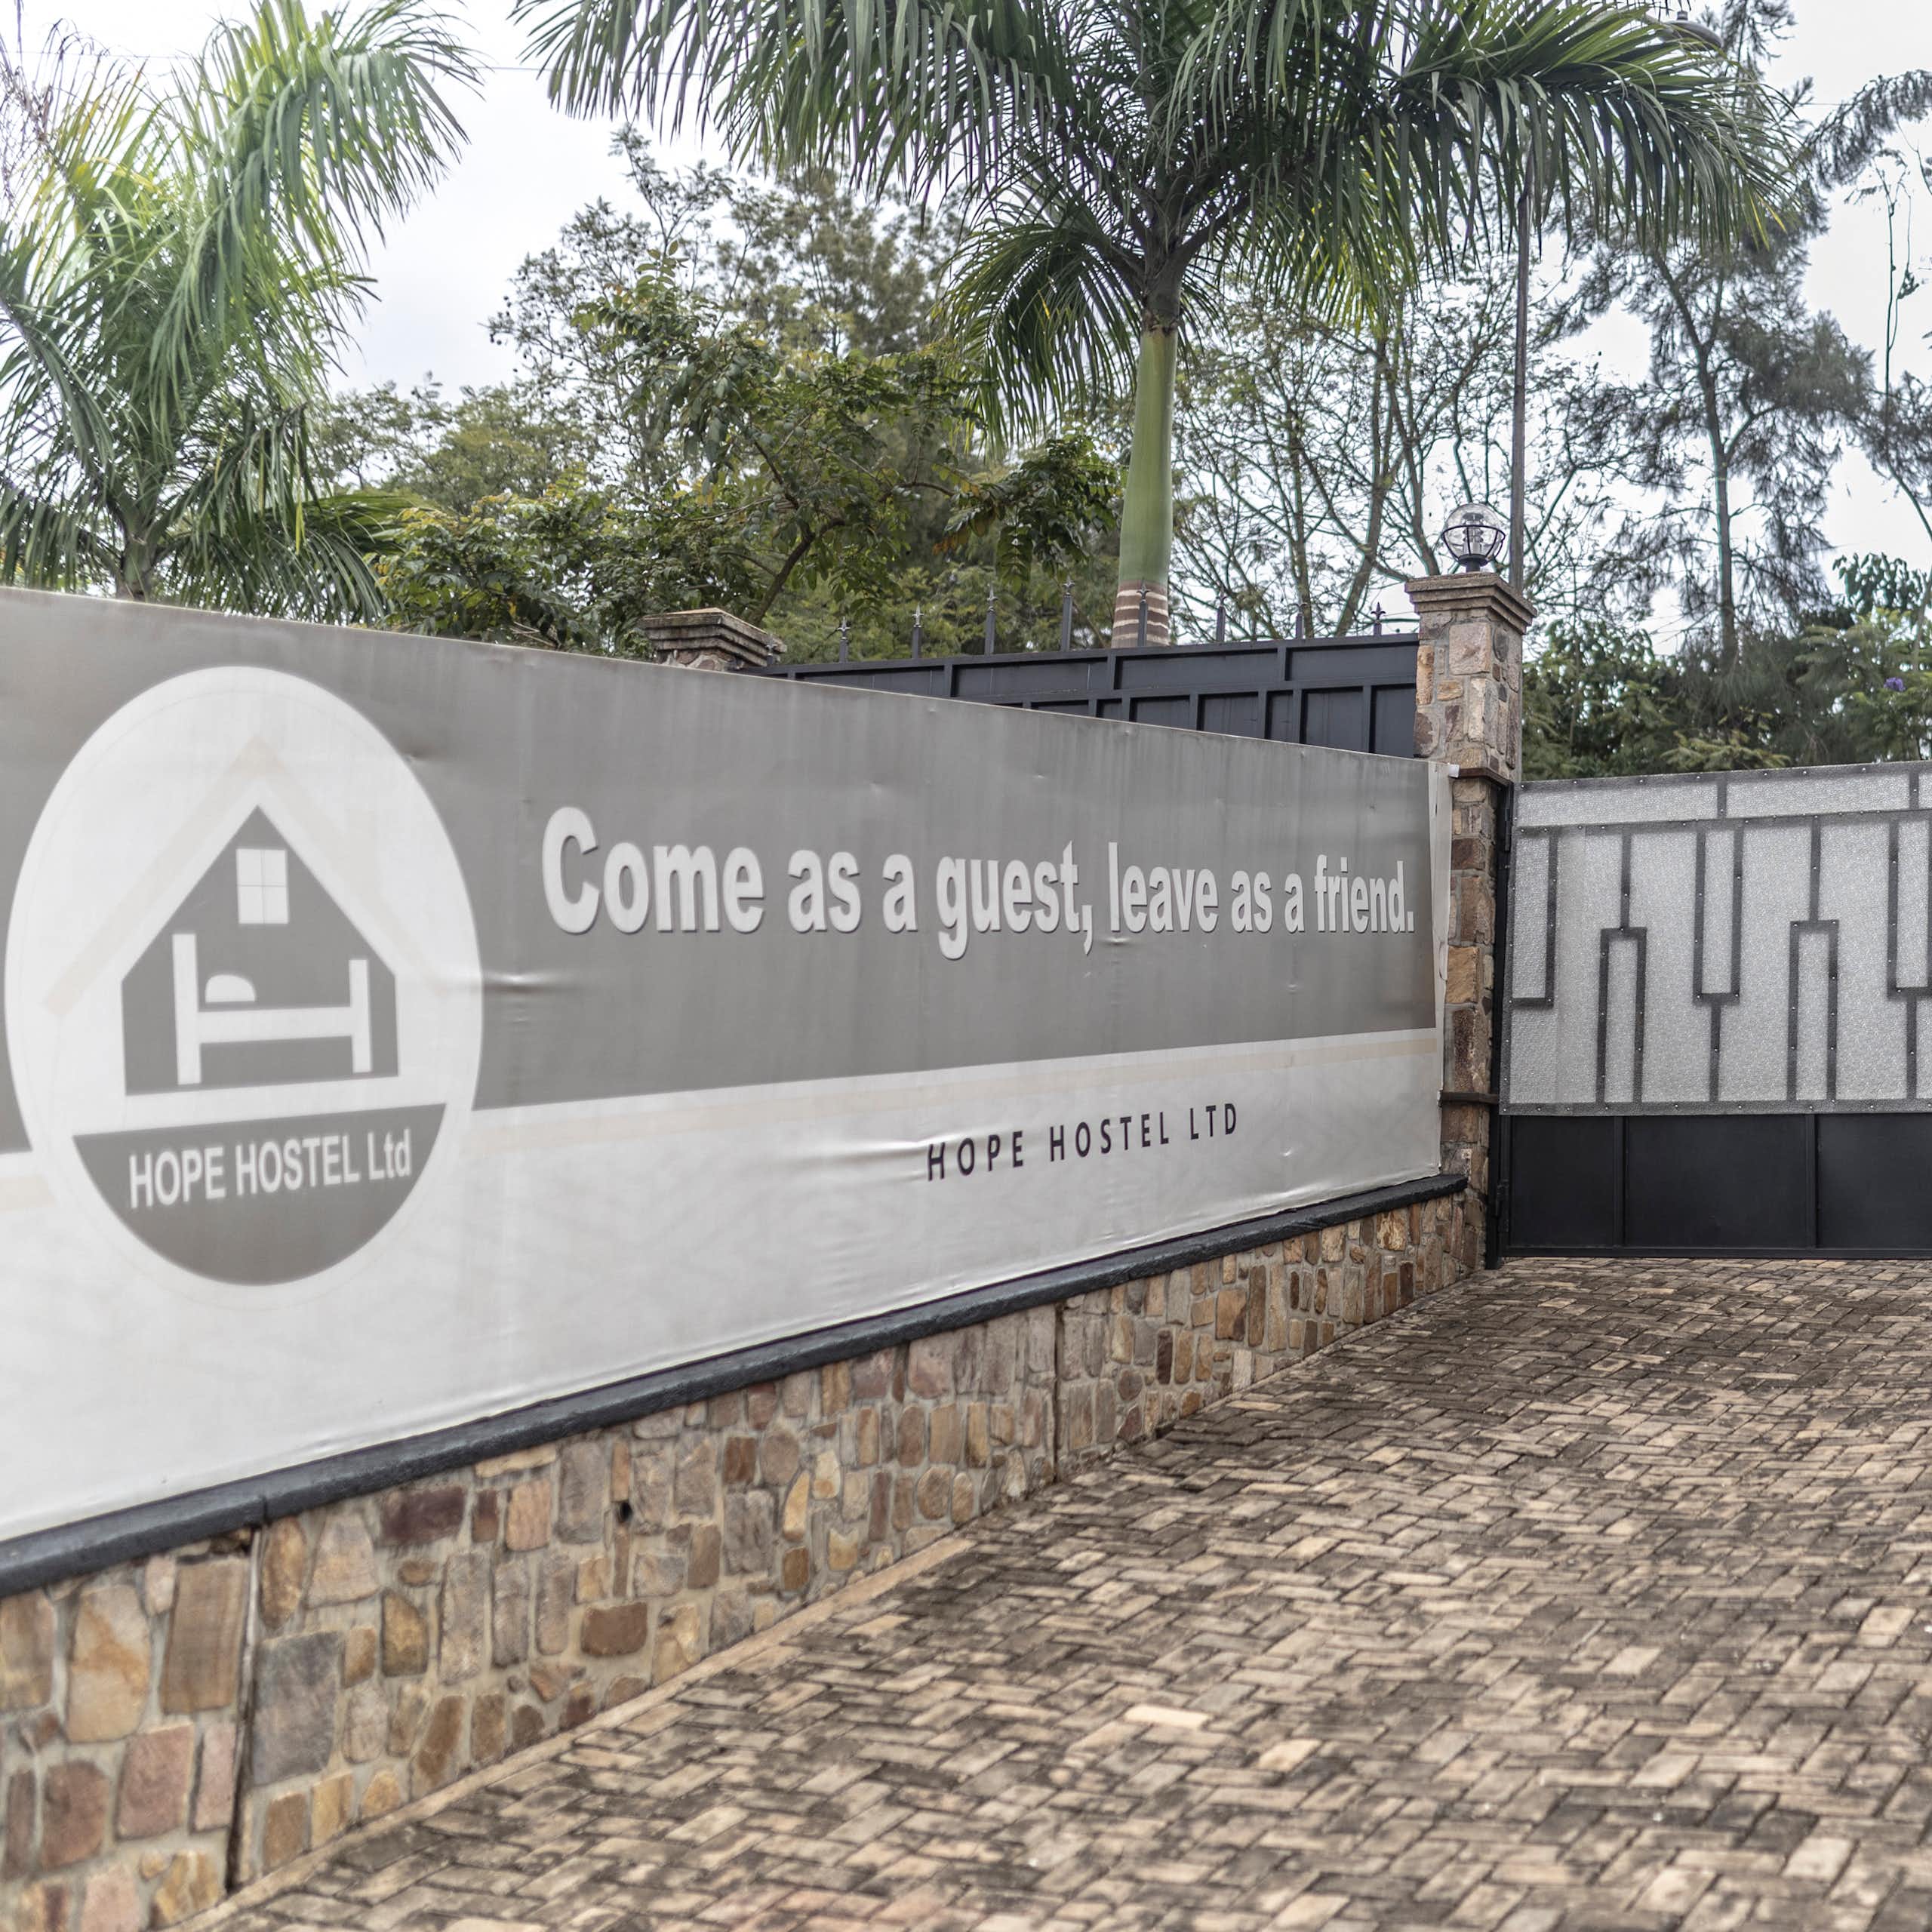 A paved and gated space with a banner on a wall saying Come as a guest, leave as a friend.